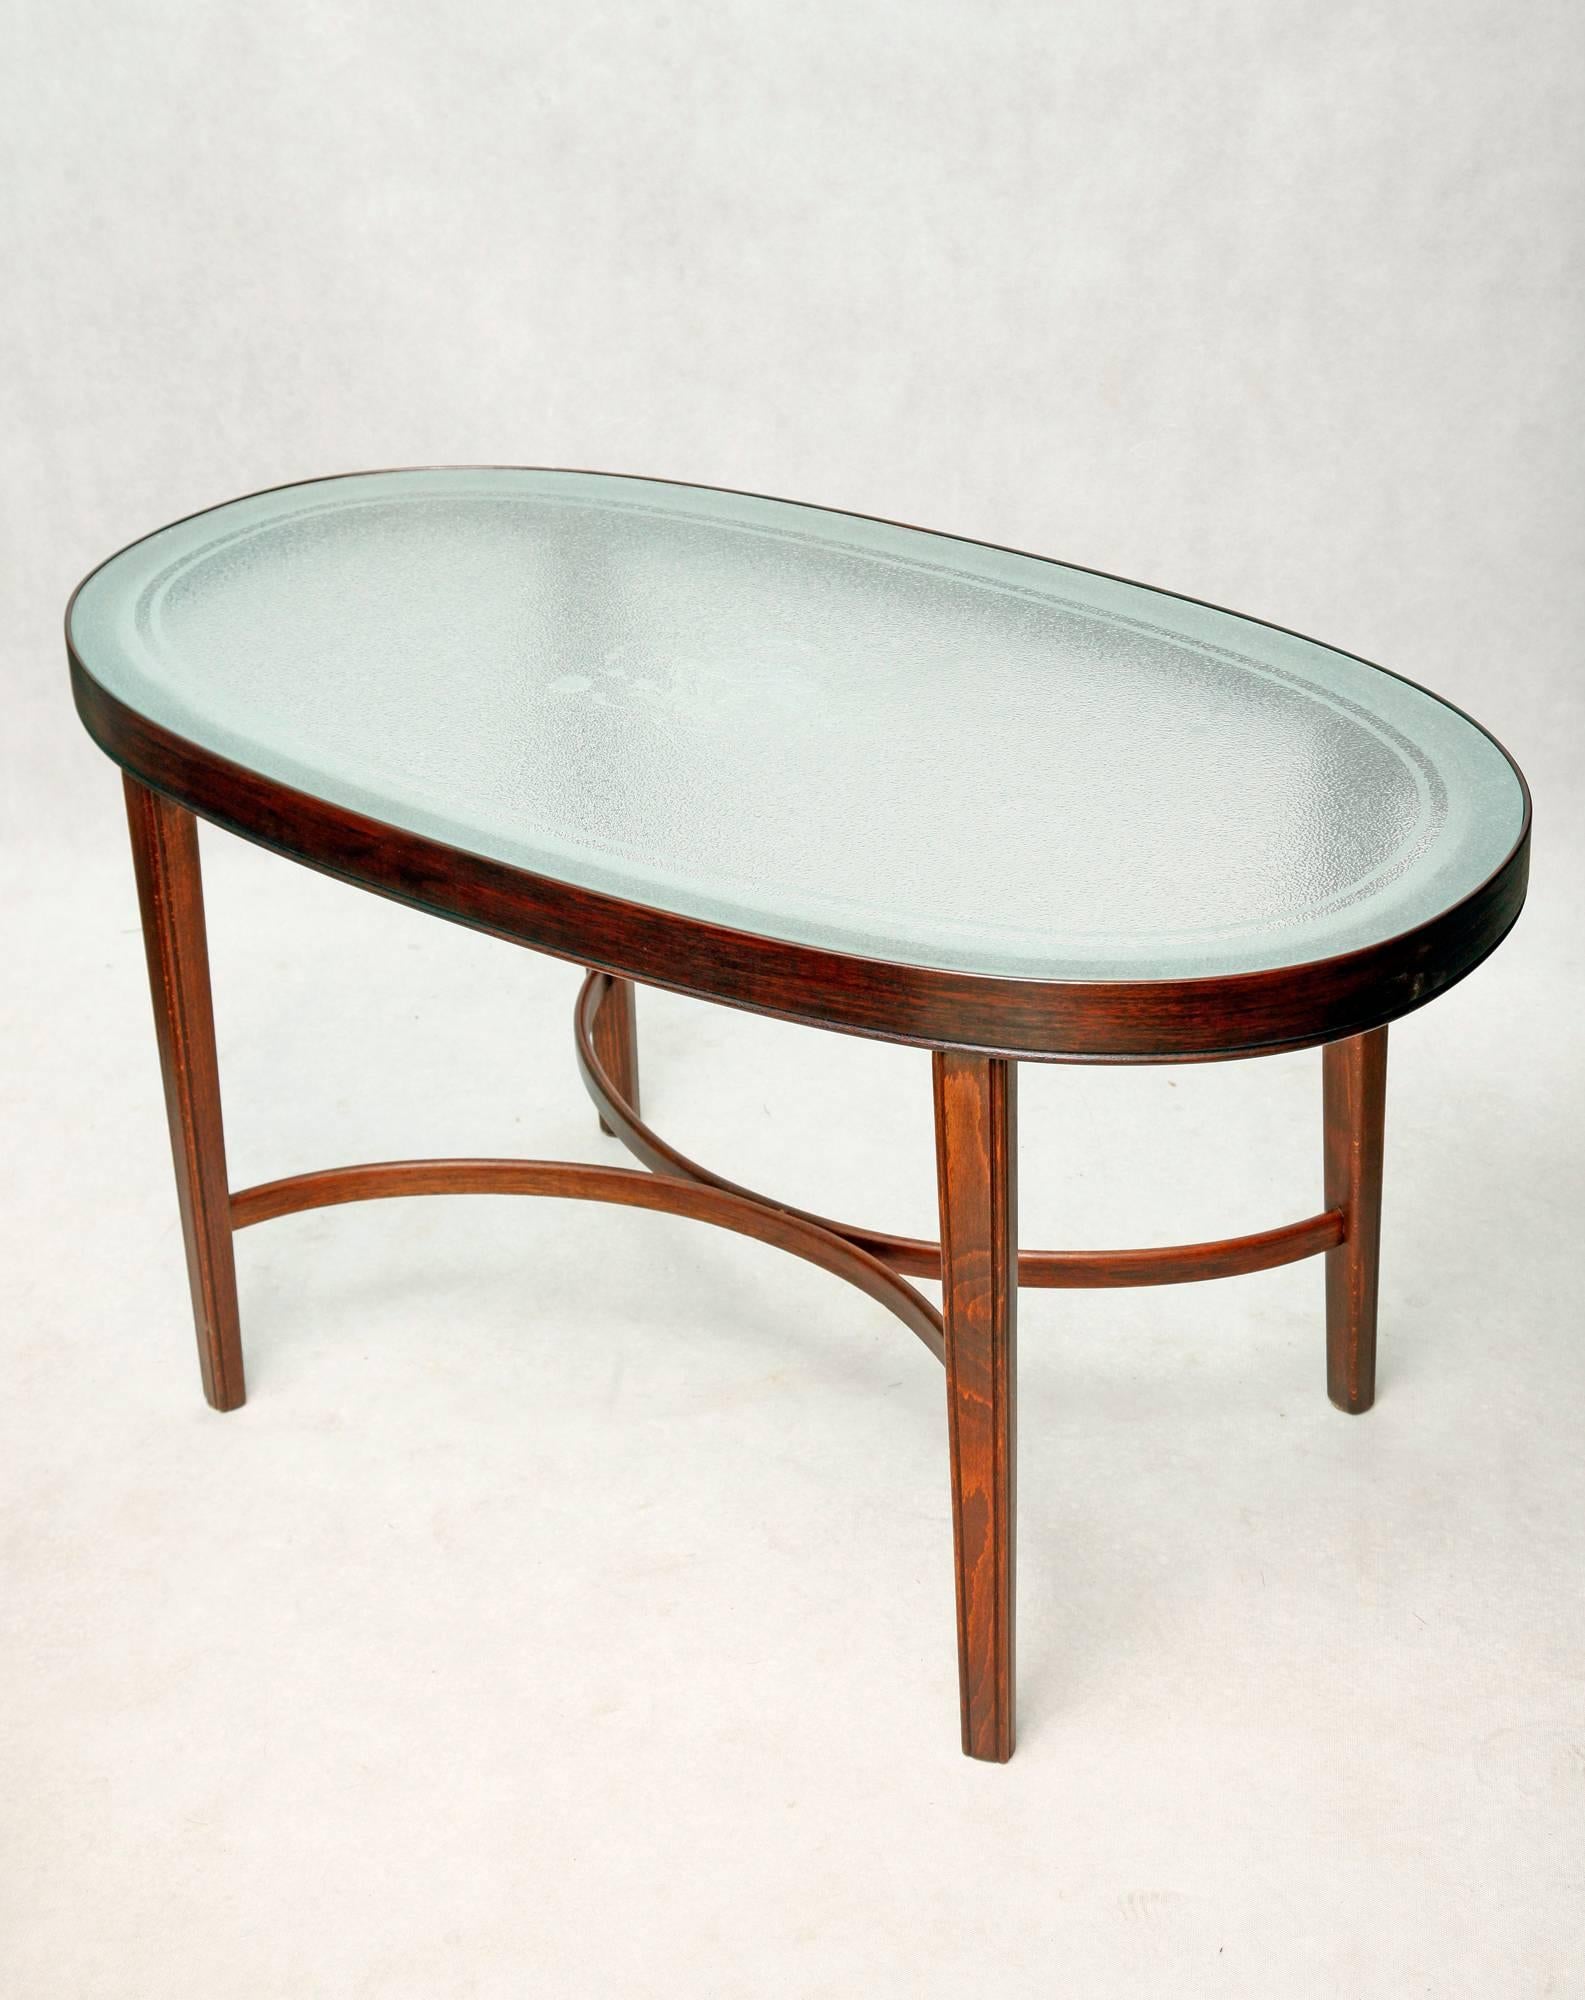 Beech Coffee Table with a Glass Top, Denmark, 1940s In Excellent Condition For Sale In Warsaw, PL